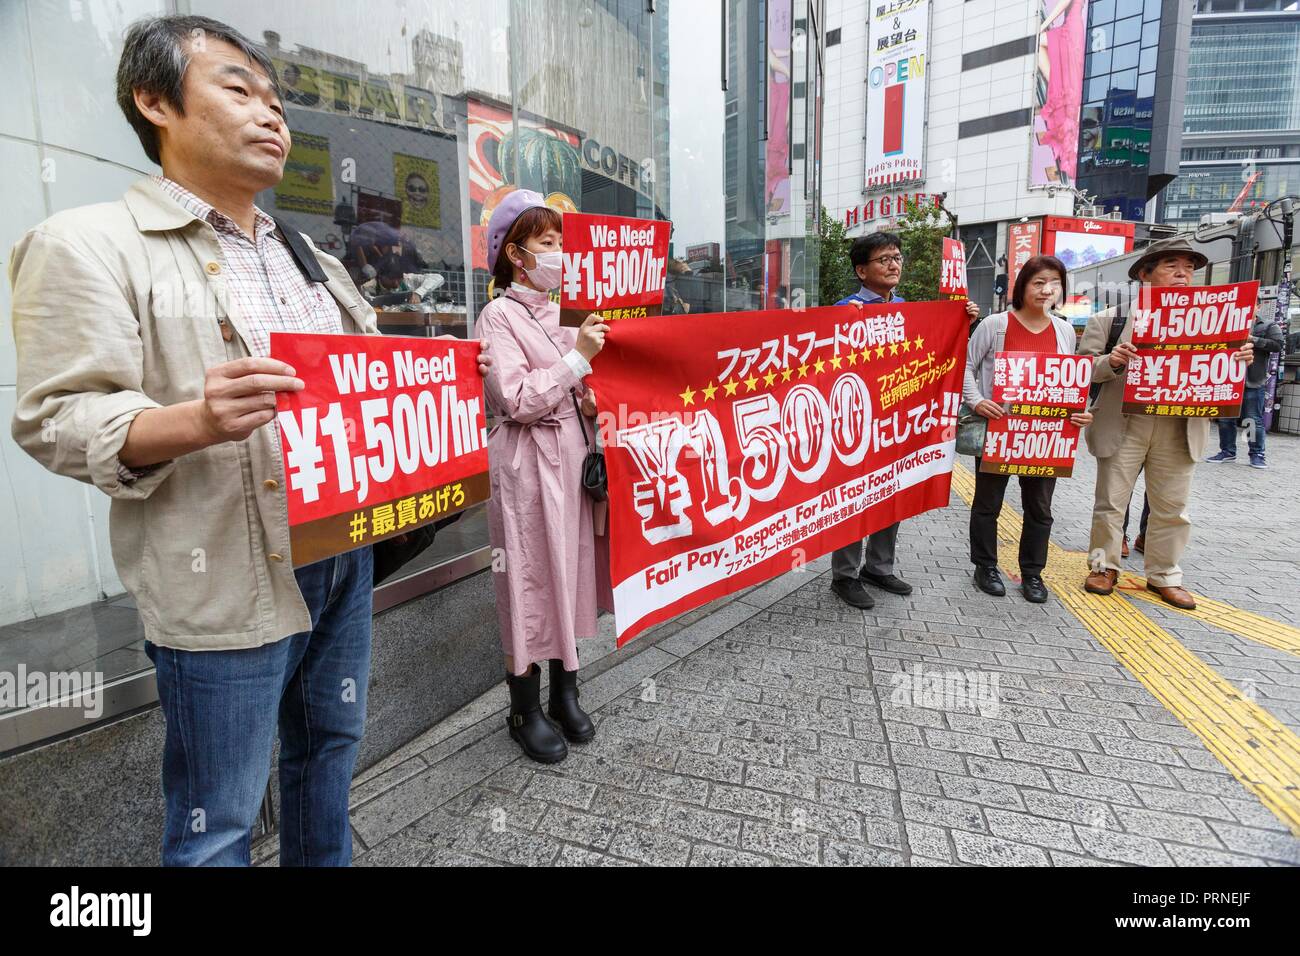 Tokyo Japan 4th October 18 Fast Food Workers Marched From The Shibuya Station To A Nearby Mcdonald S To Protest For Better Payments And Conditions On October 4 18 Tokyo Japan The Protest